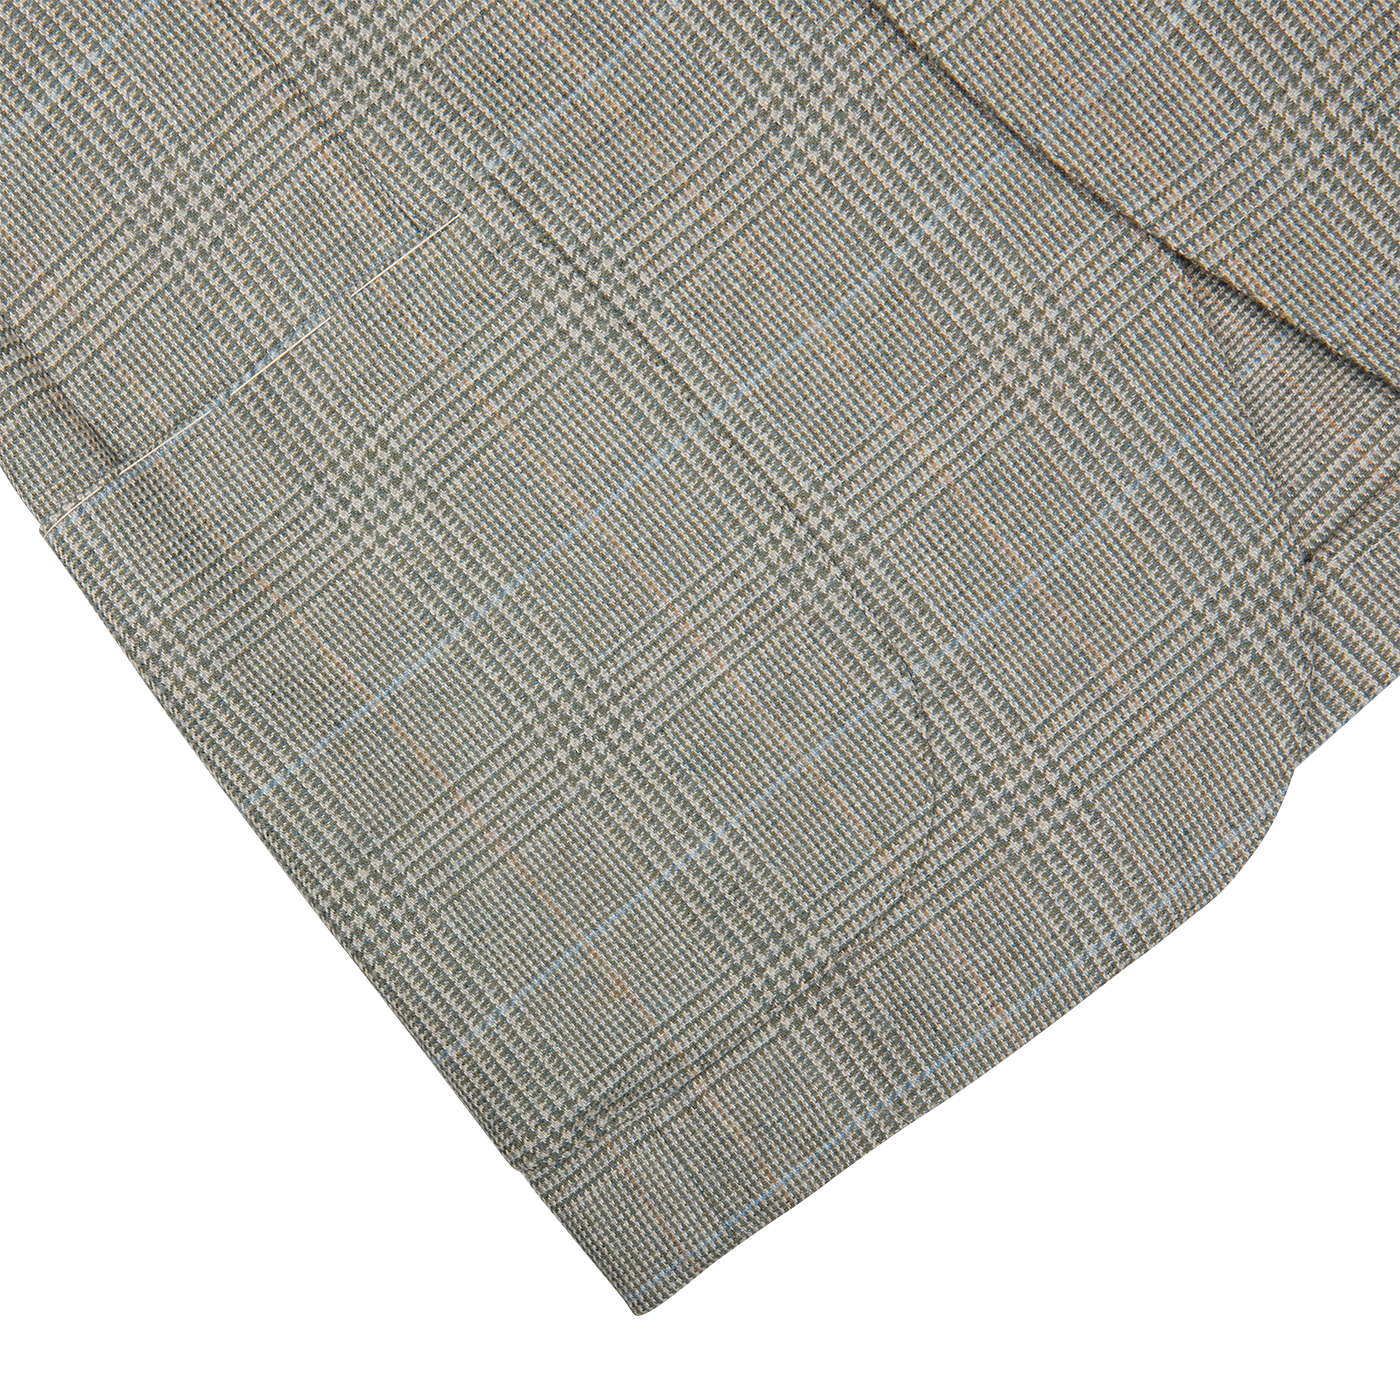 Folded fabric with a herringbone pattern on a geometrically patterned background, epitomizing contemporary tailoring for a De Petrillo Green Checked Wool Cotton Cashmere Posillipo Blazer.